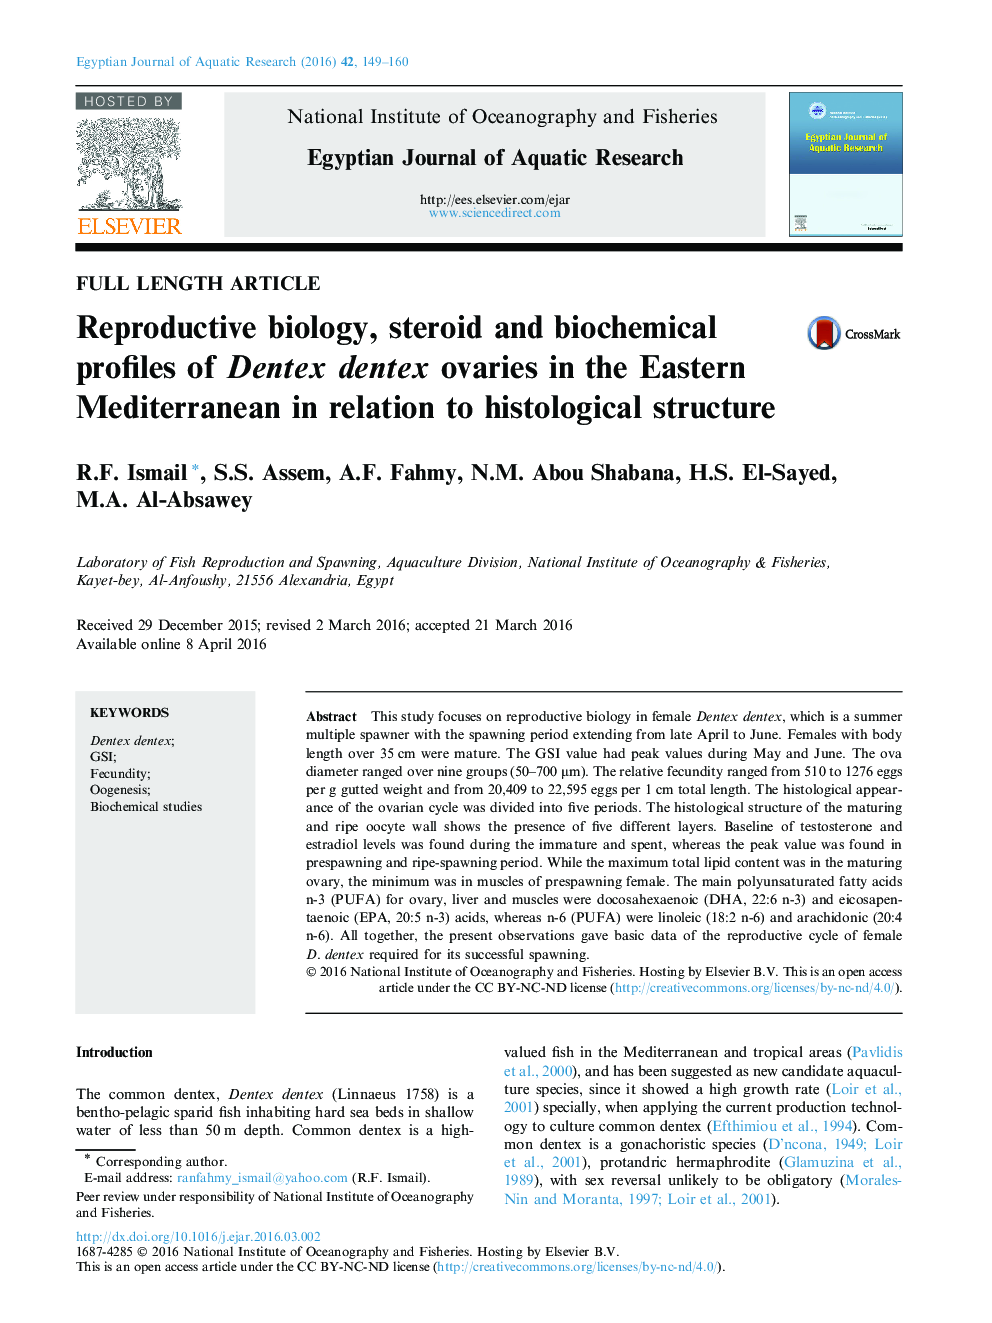 Reproductive biology, steroid and biochemical profiles of Dentex dentex ovaries in the Eastern Mediterranean in relation to histological structure 